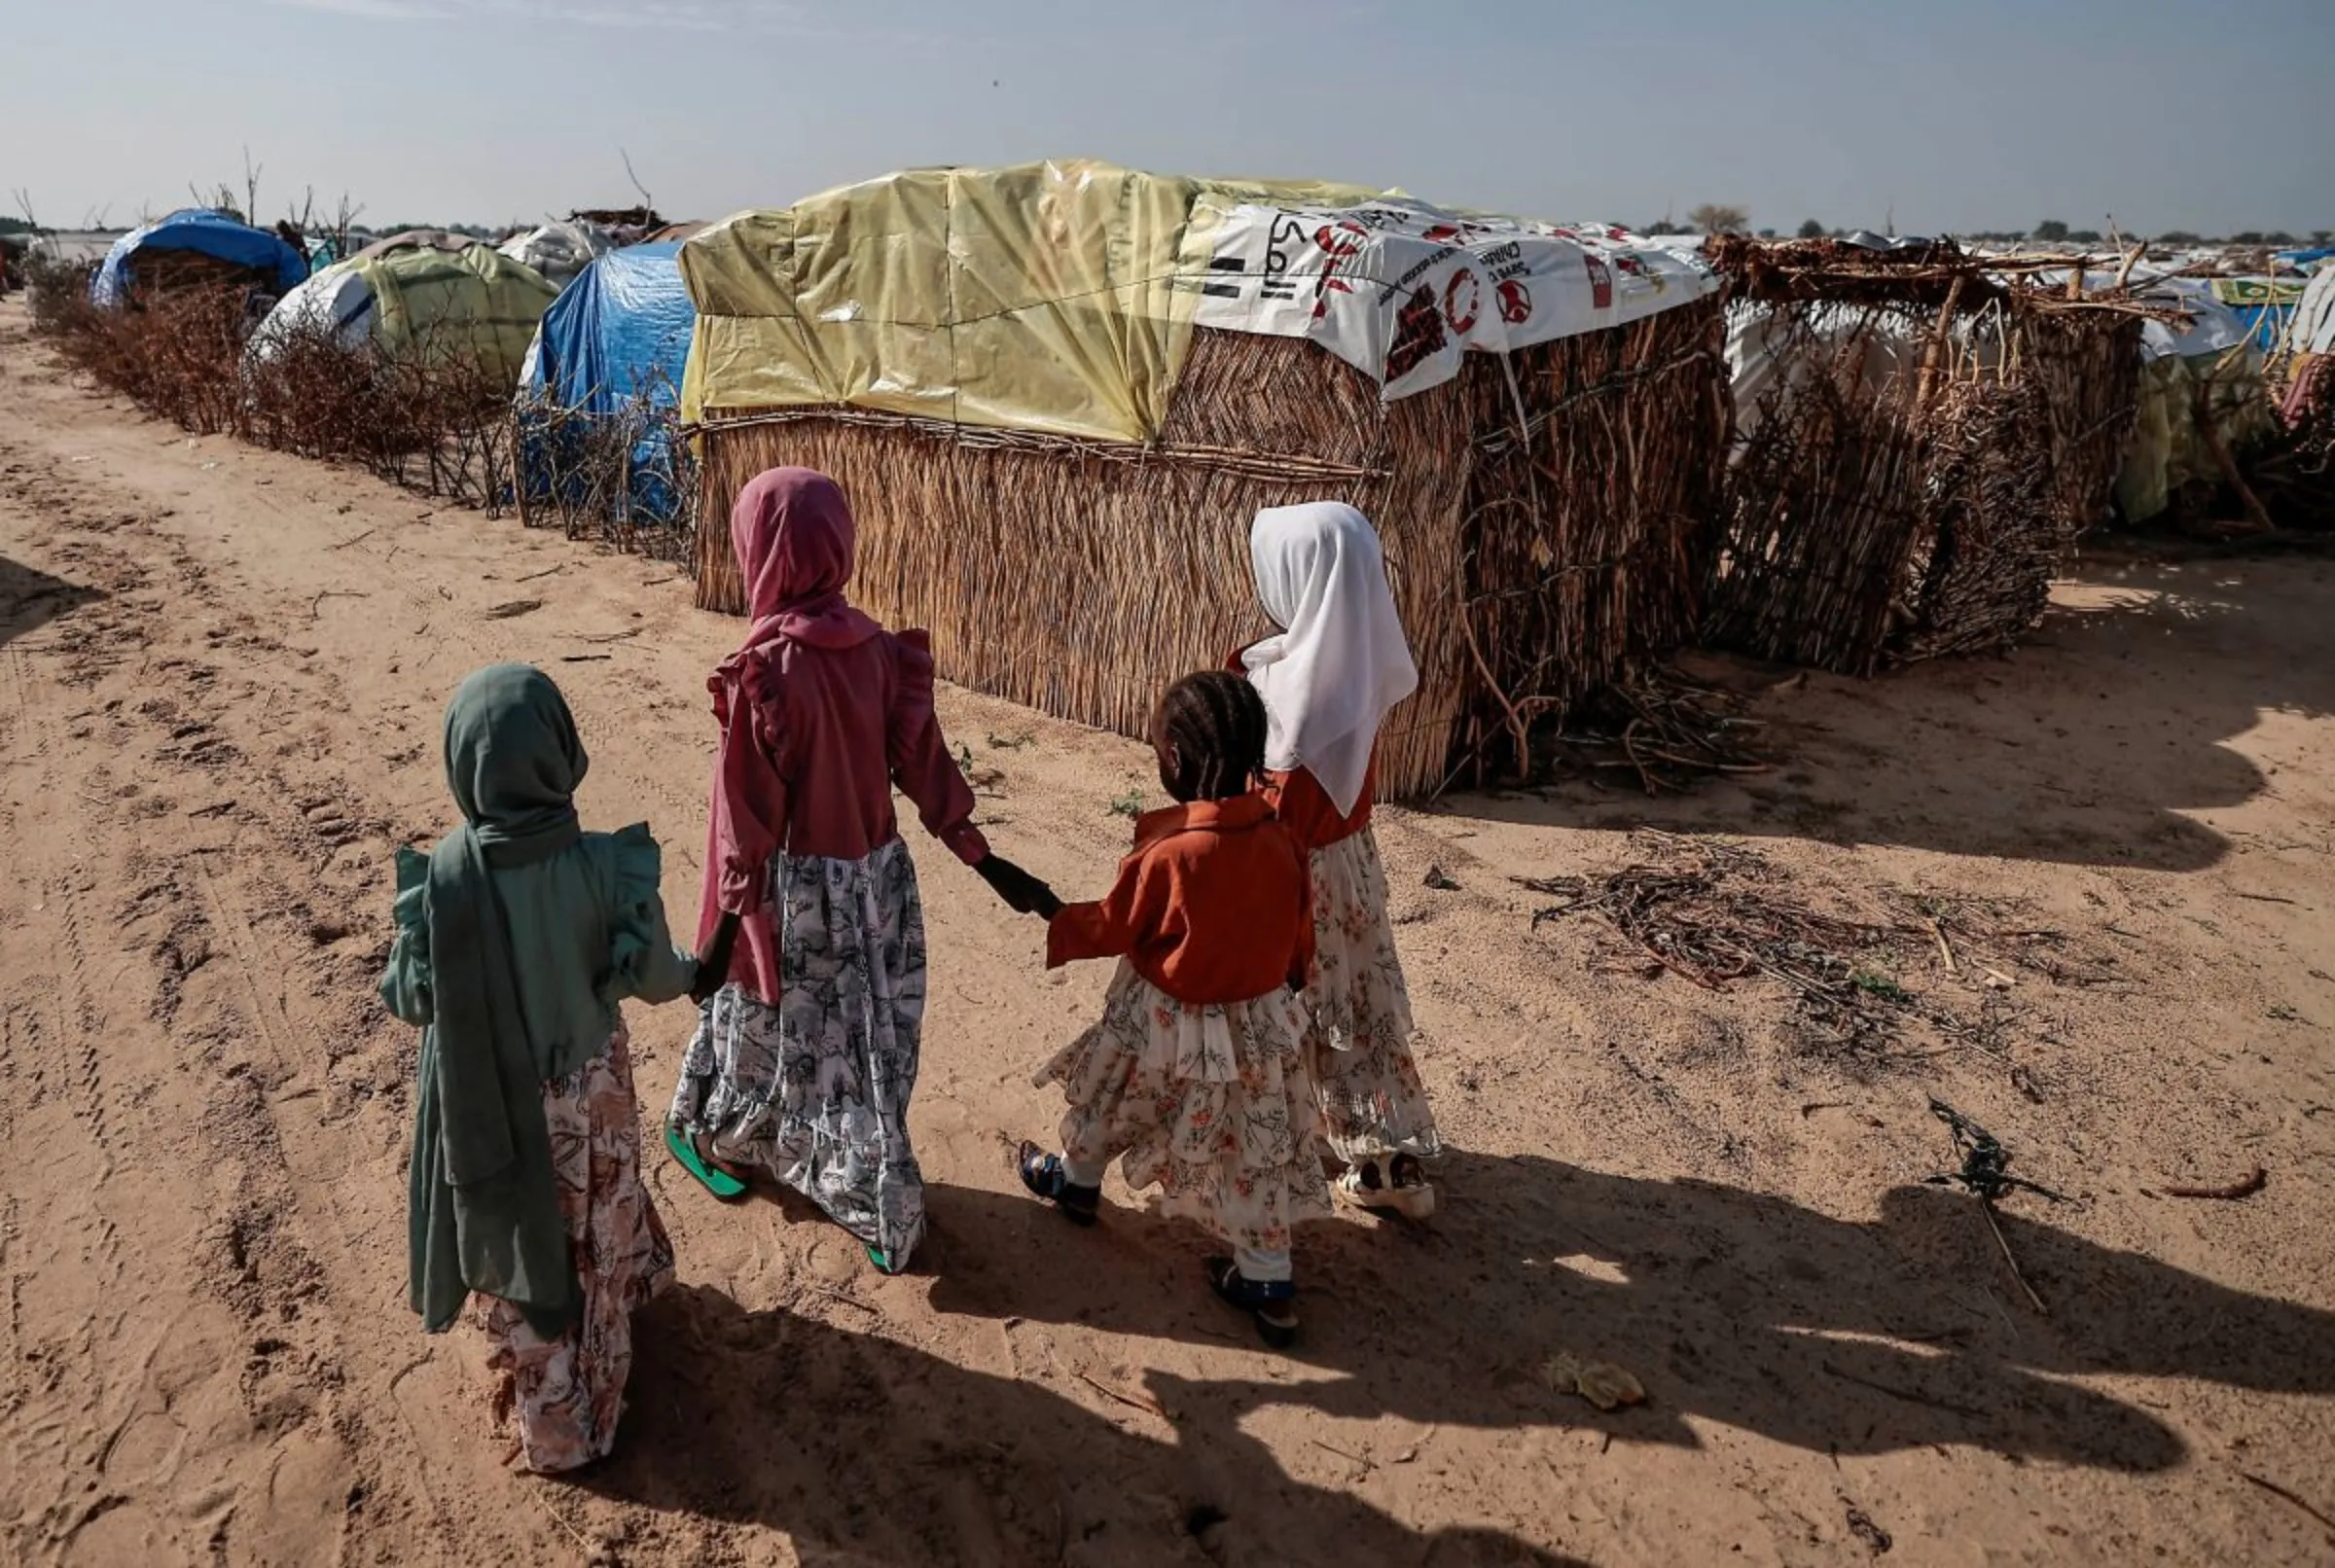 Sudanese girls who fled the conflict in Sudan's Darfur region, walk beside makeshift shelters holding each other's hands in Adre, Chad July 29, 2023